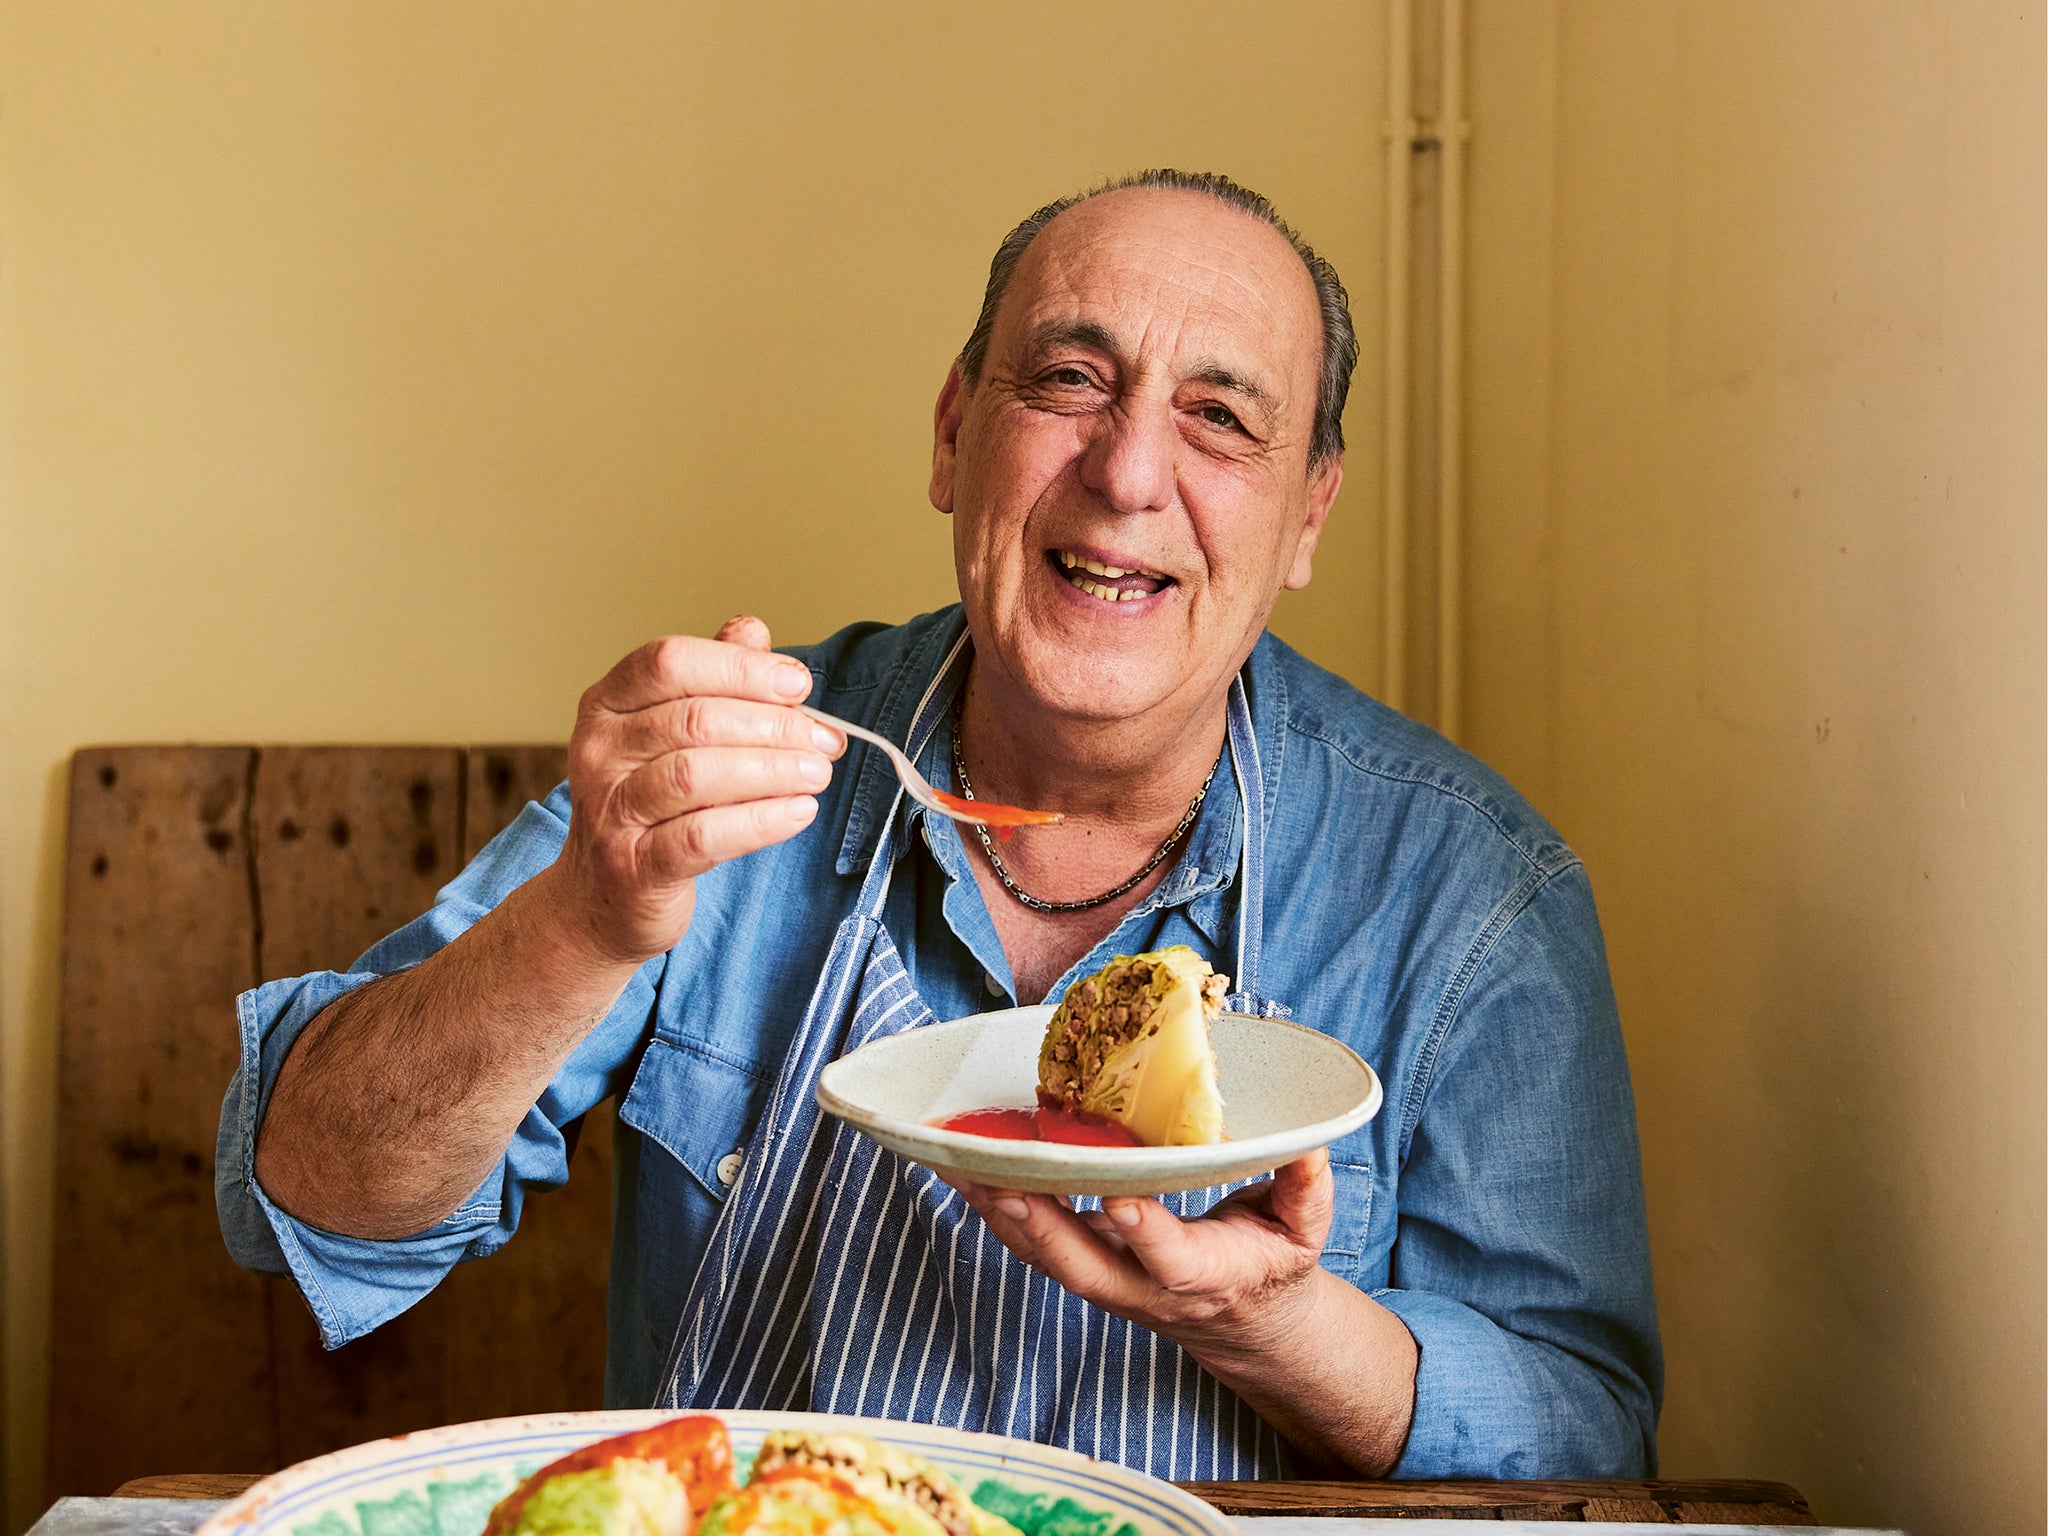 Knowing what you can do with leftovers is the key to cutting your food bill, Contaldo believes